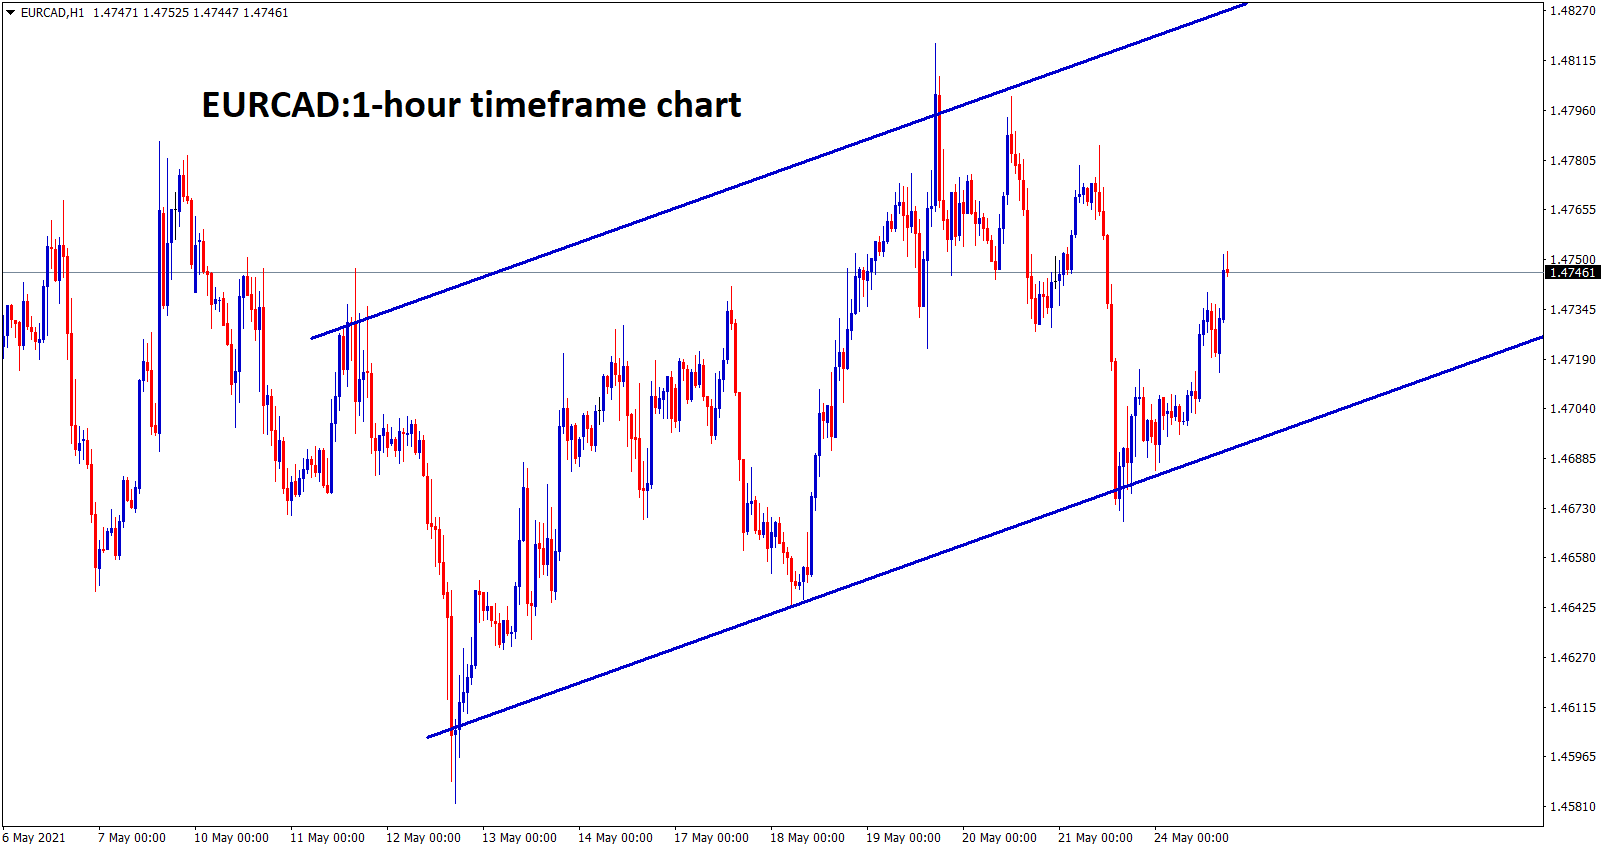 EURCAD is moving in an Ascending channel in the 1 hour timeframe